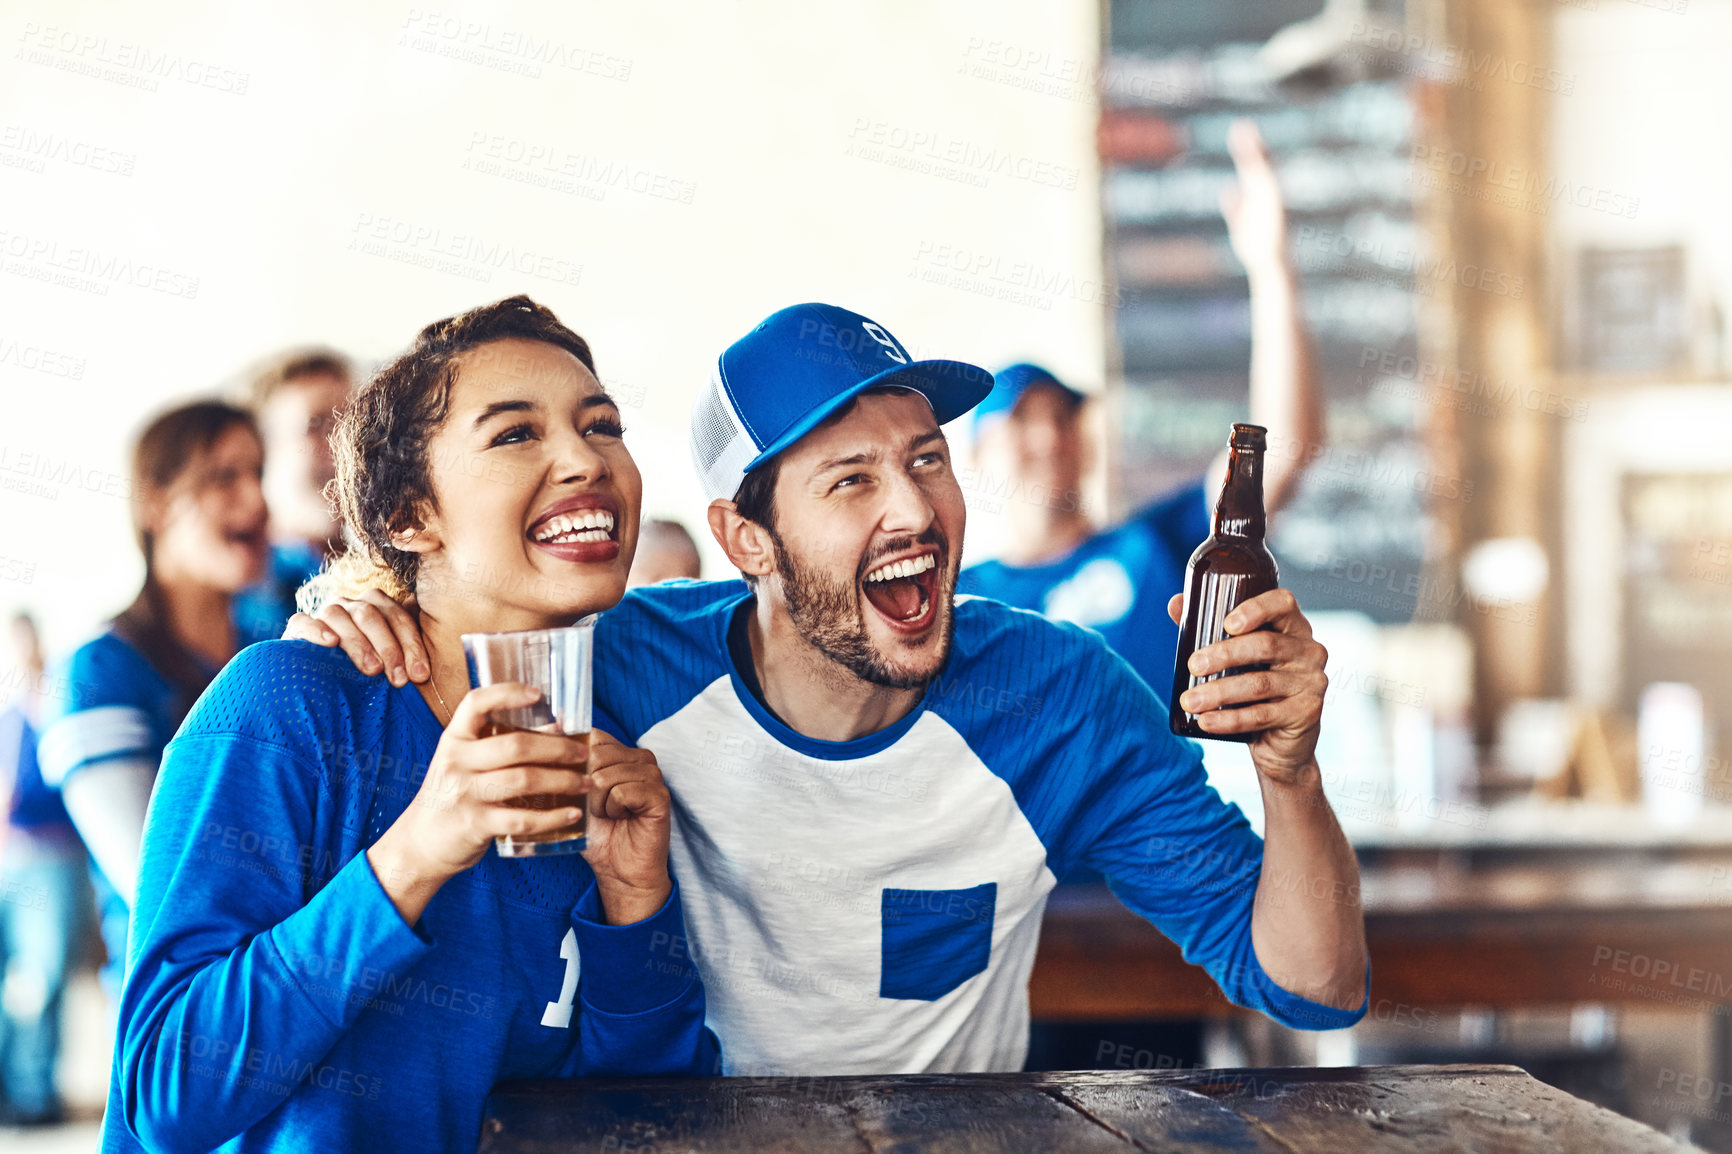 Buy stock photo Shot of a young man and woman having beers while watching a sports game at a bar